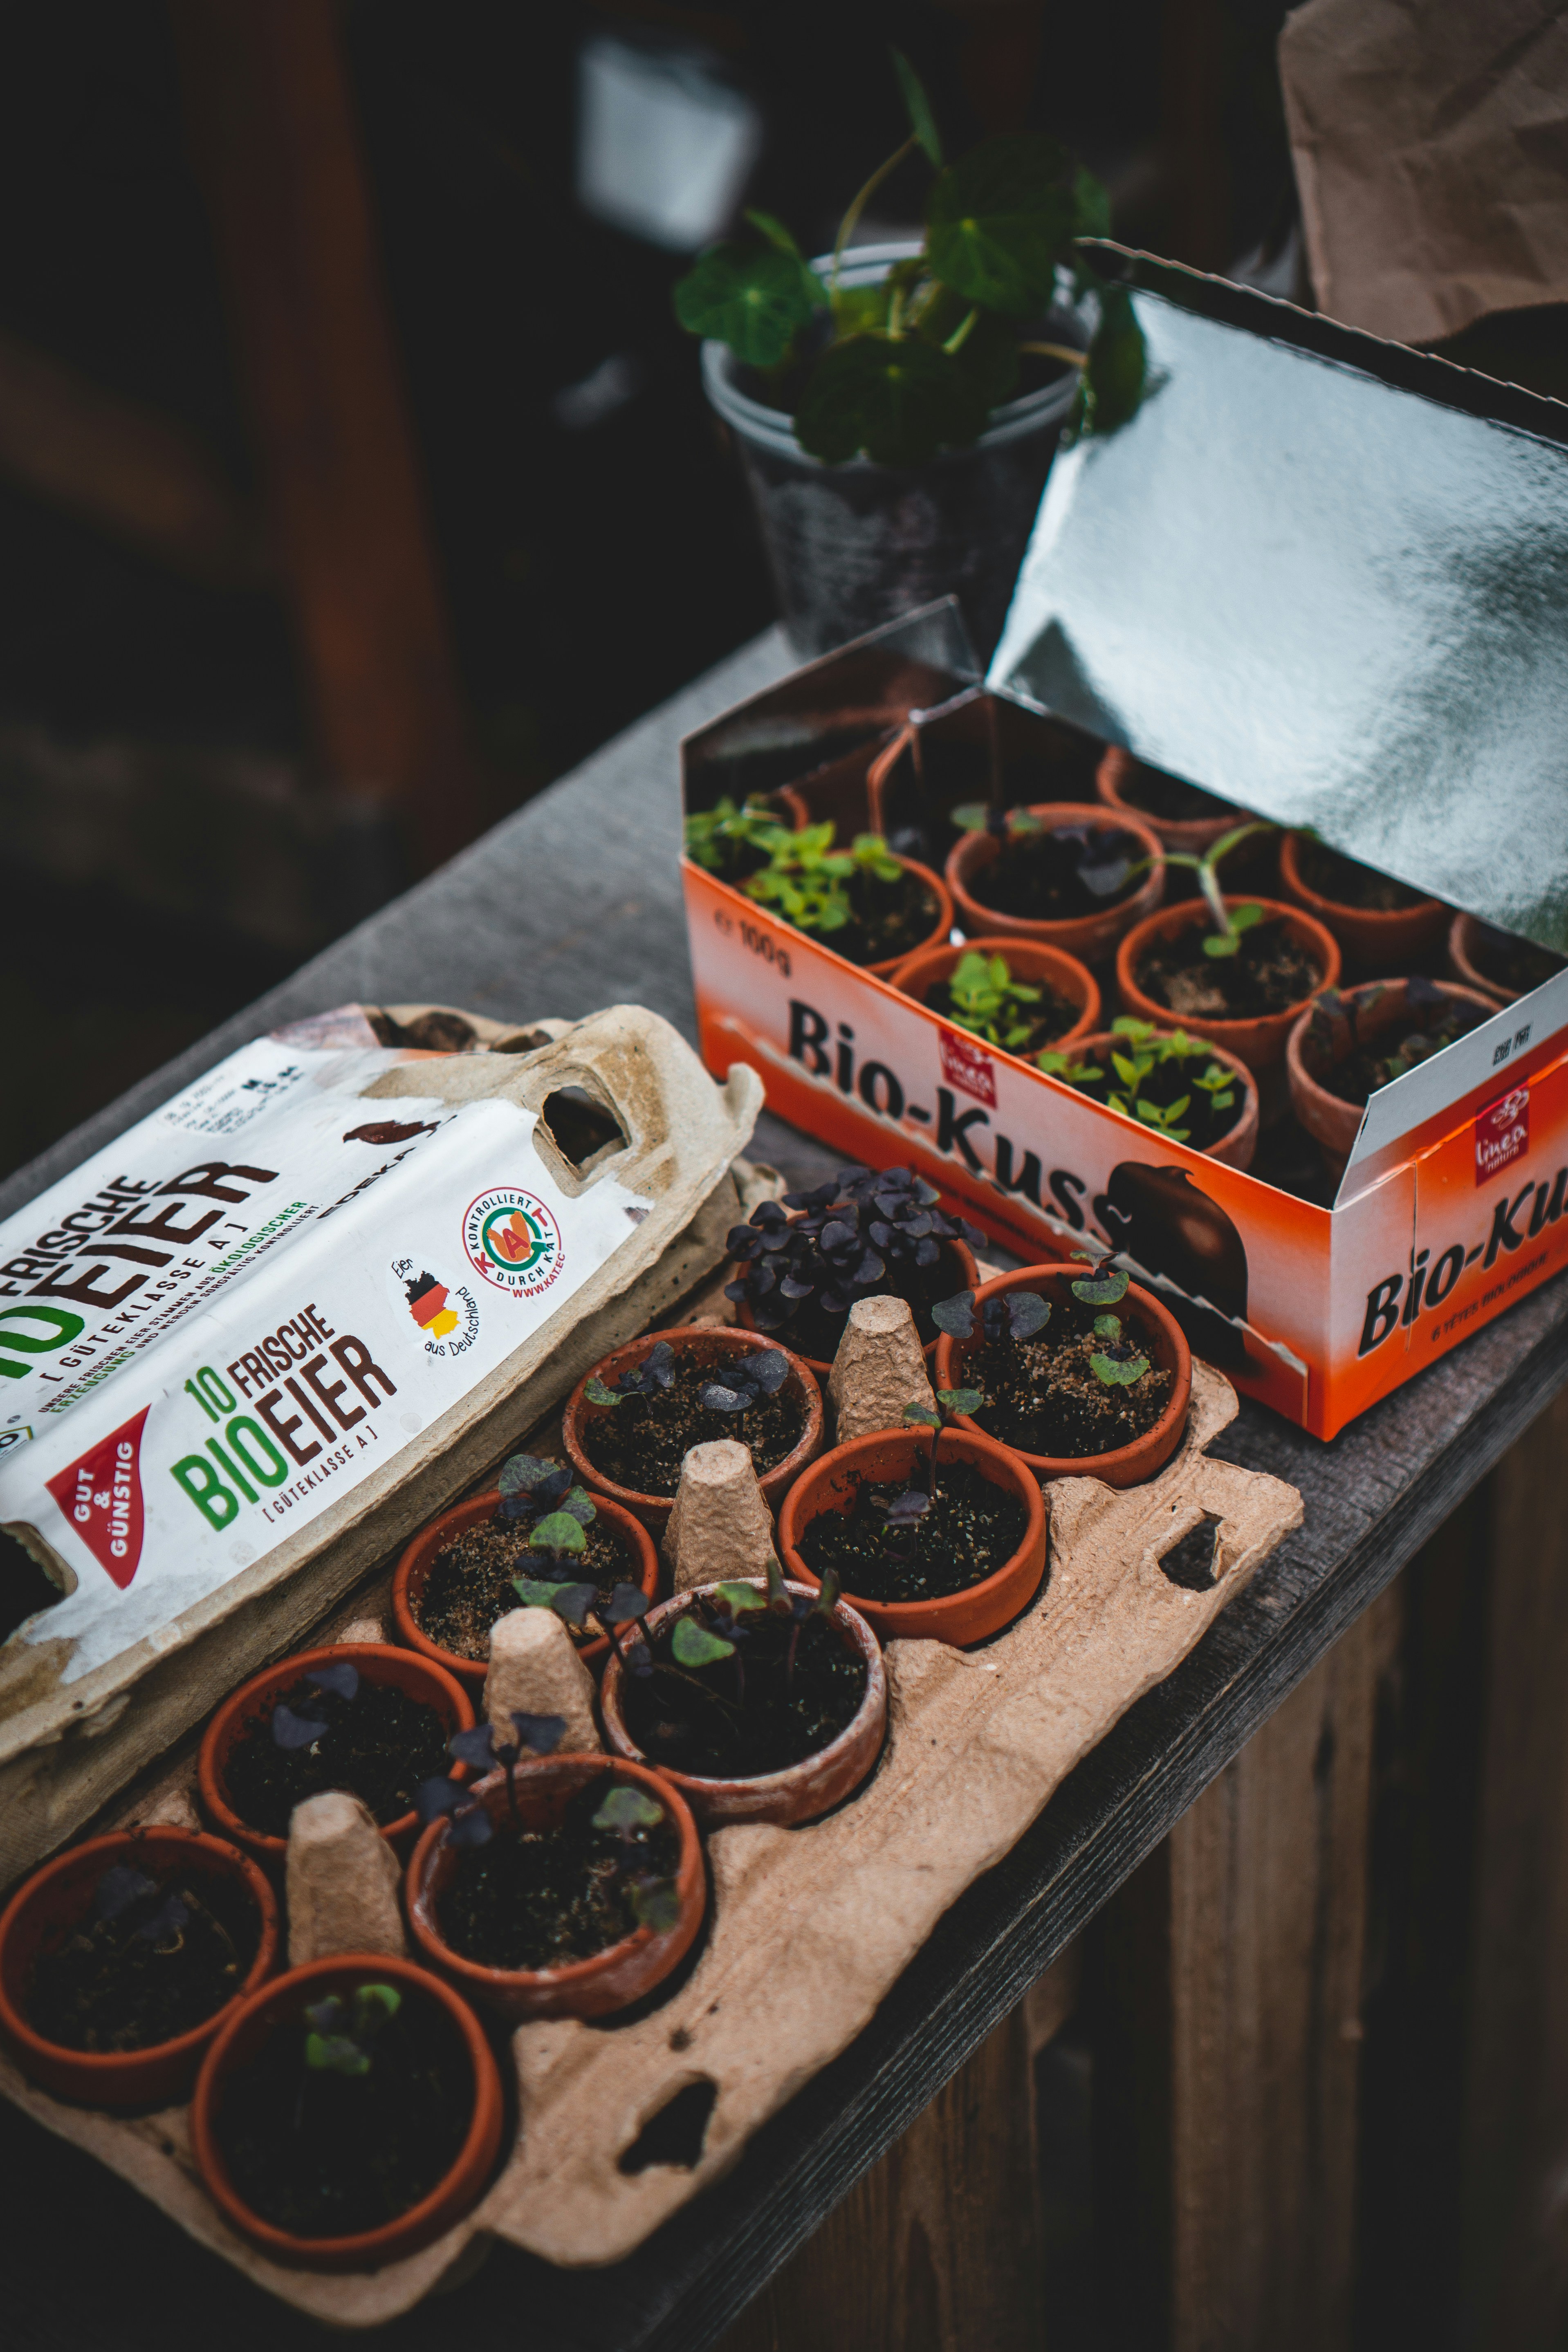 When Is The Best Time To Plant Seeds?